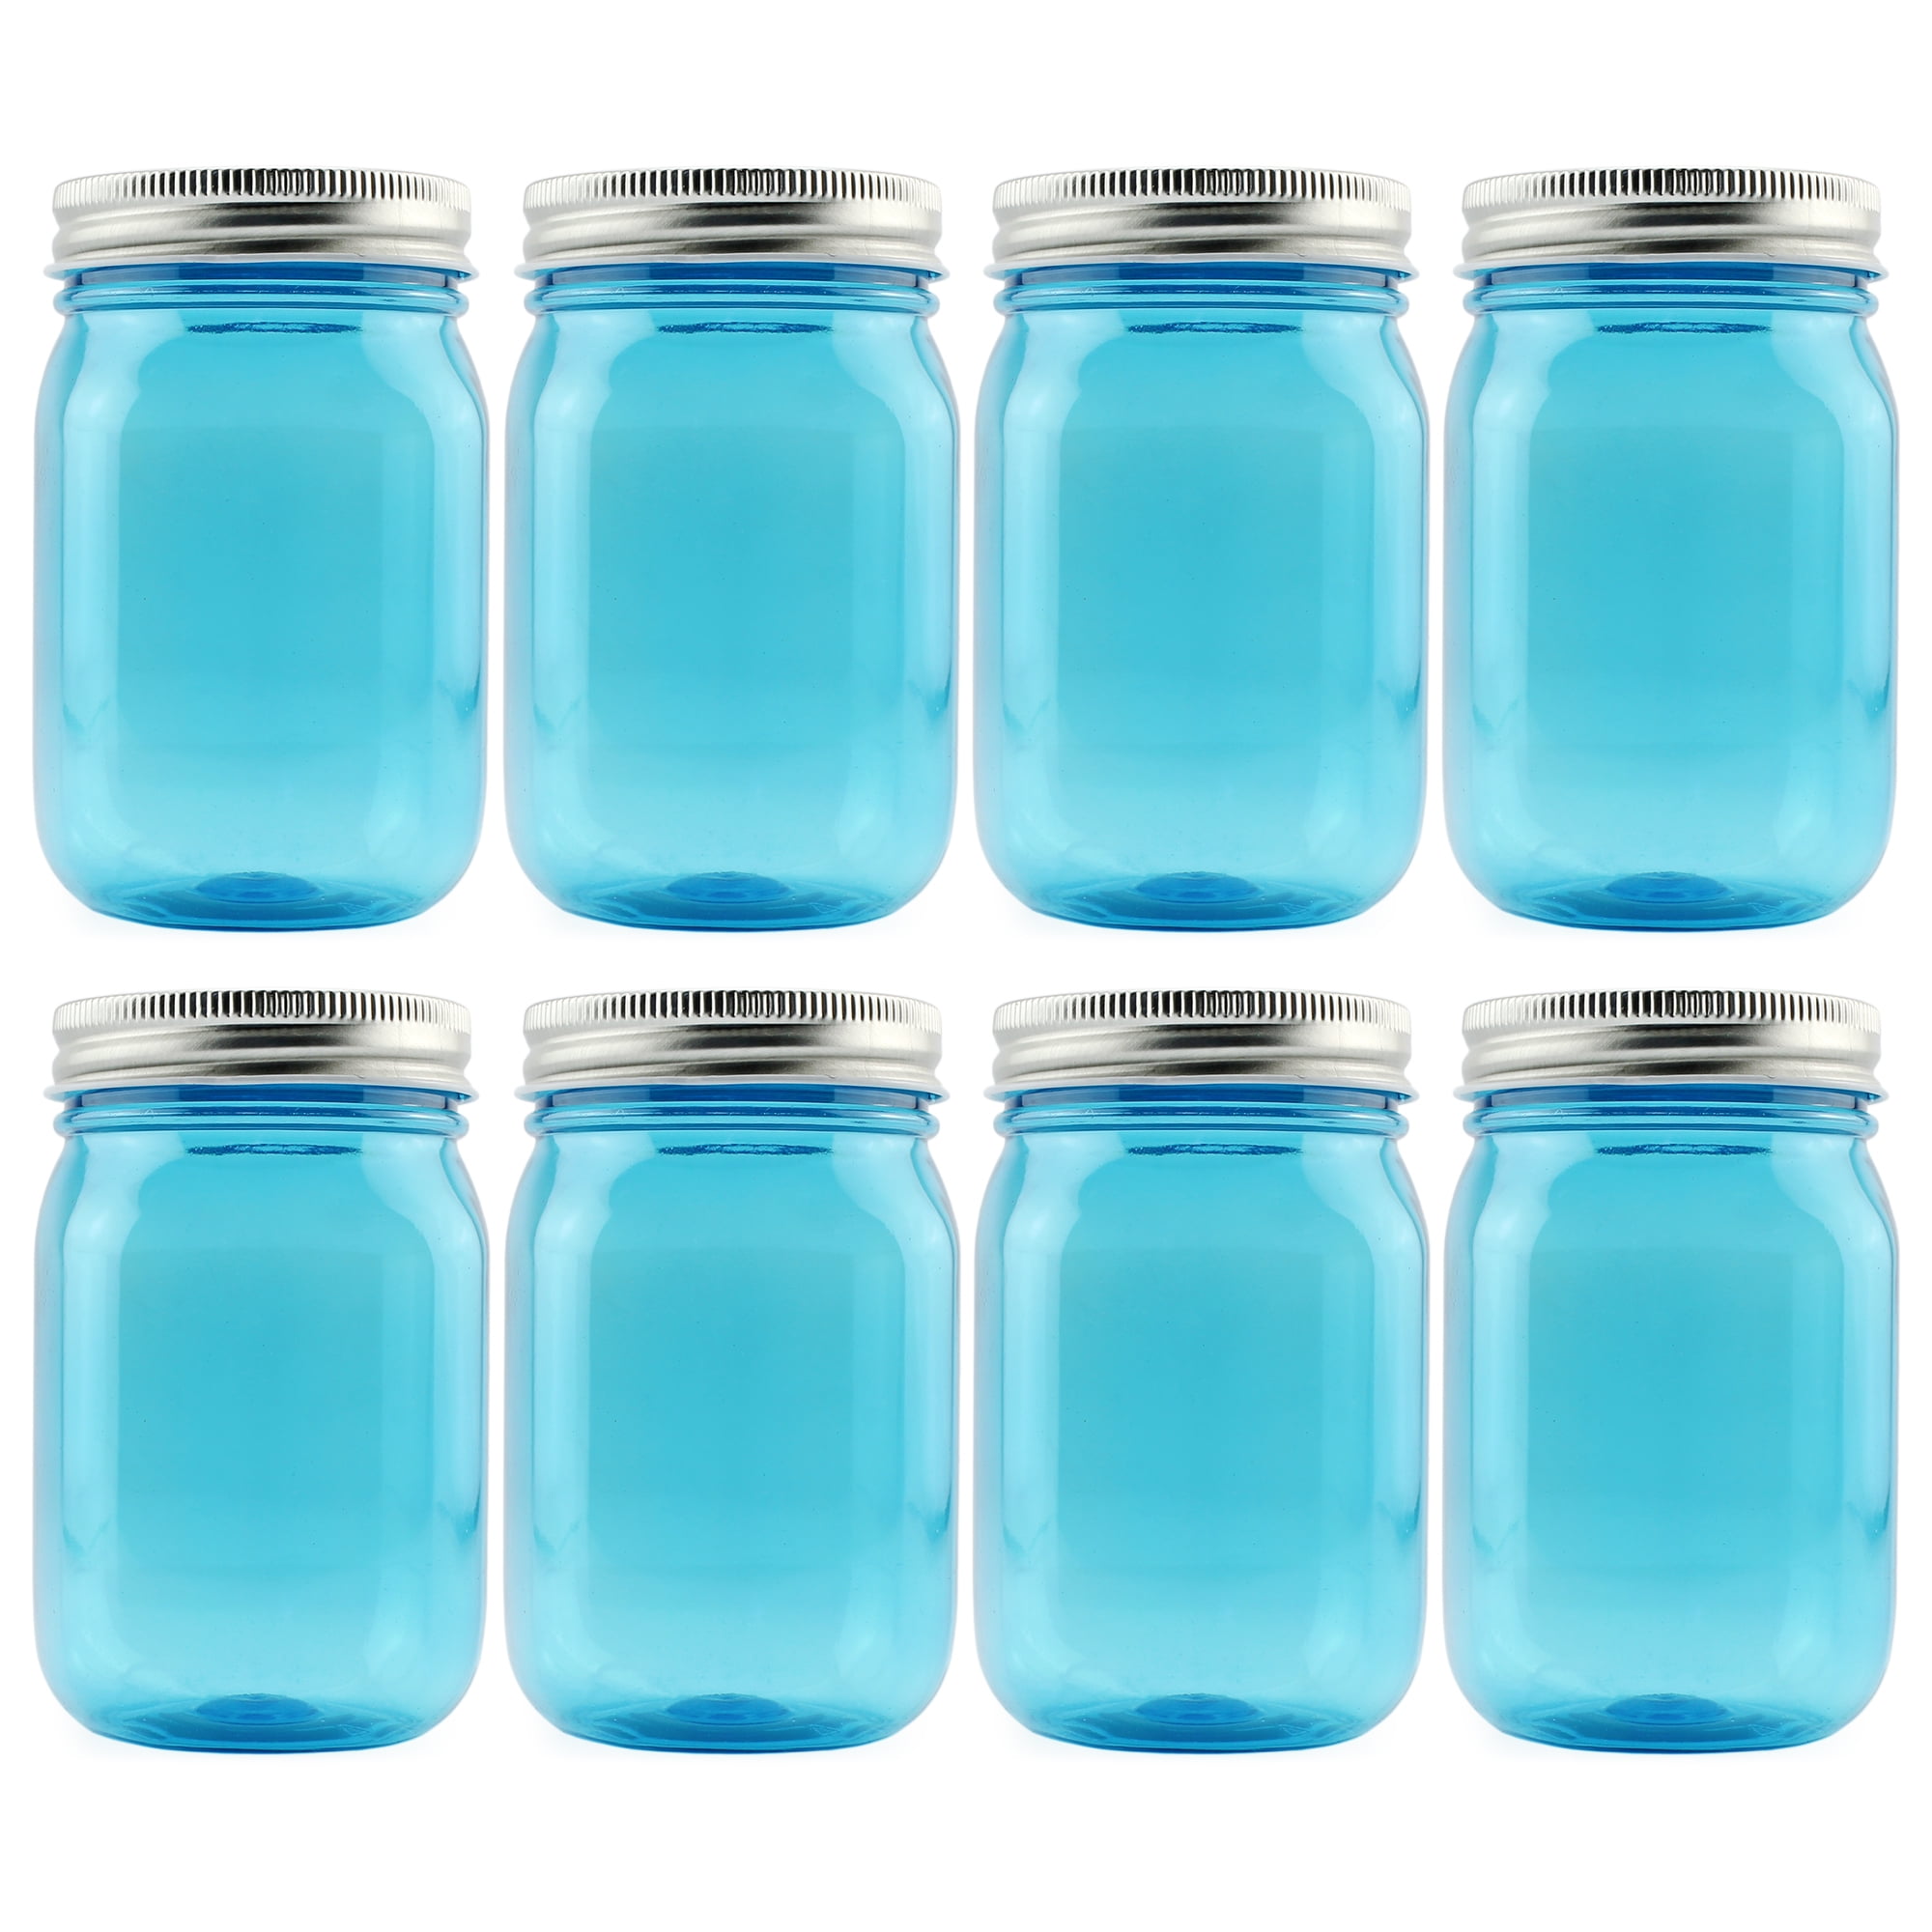 ljdeals 16 oz Clear Plastic Jars with Lids, Storage Containers, Wide Mouth  PET Mason Jars, Pack of 6, BPA Free, Food Safe, Made in USA